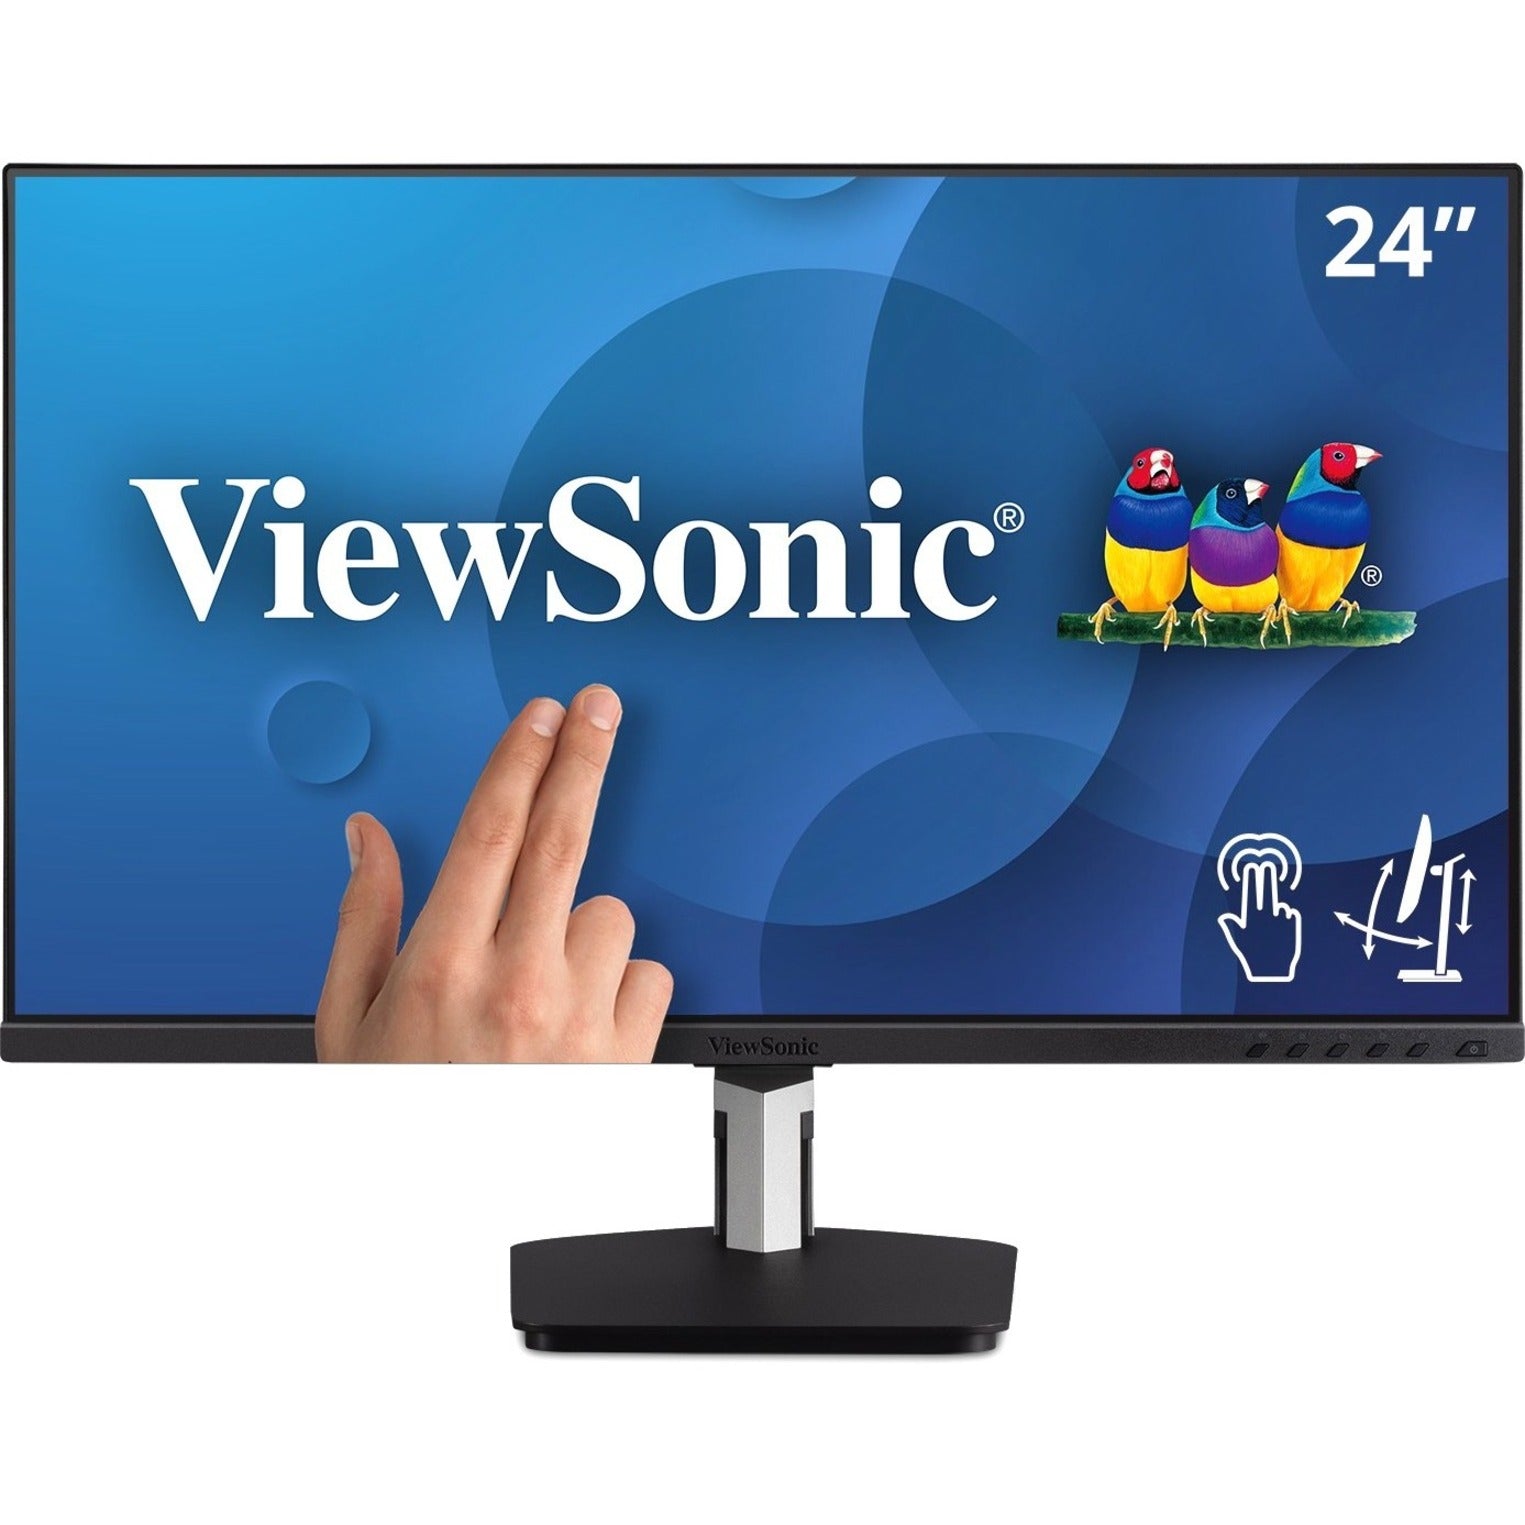 ViewSonic TD2455 24" Touch Display, Advanced Ergonomic Stand, 1920x1080 Resolution, 10-point Touch